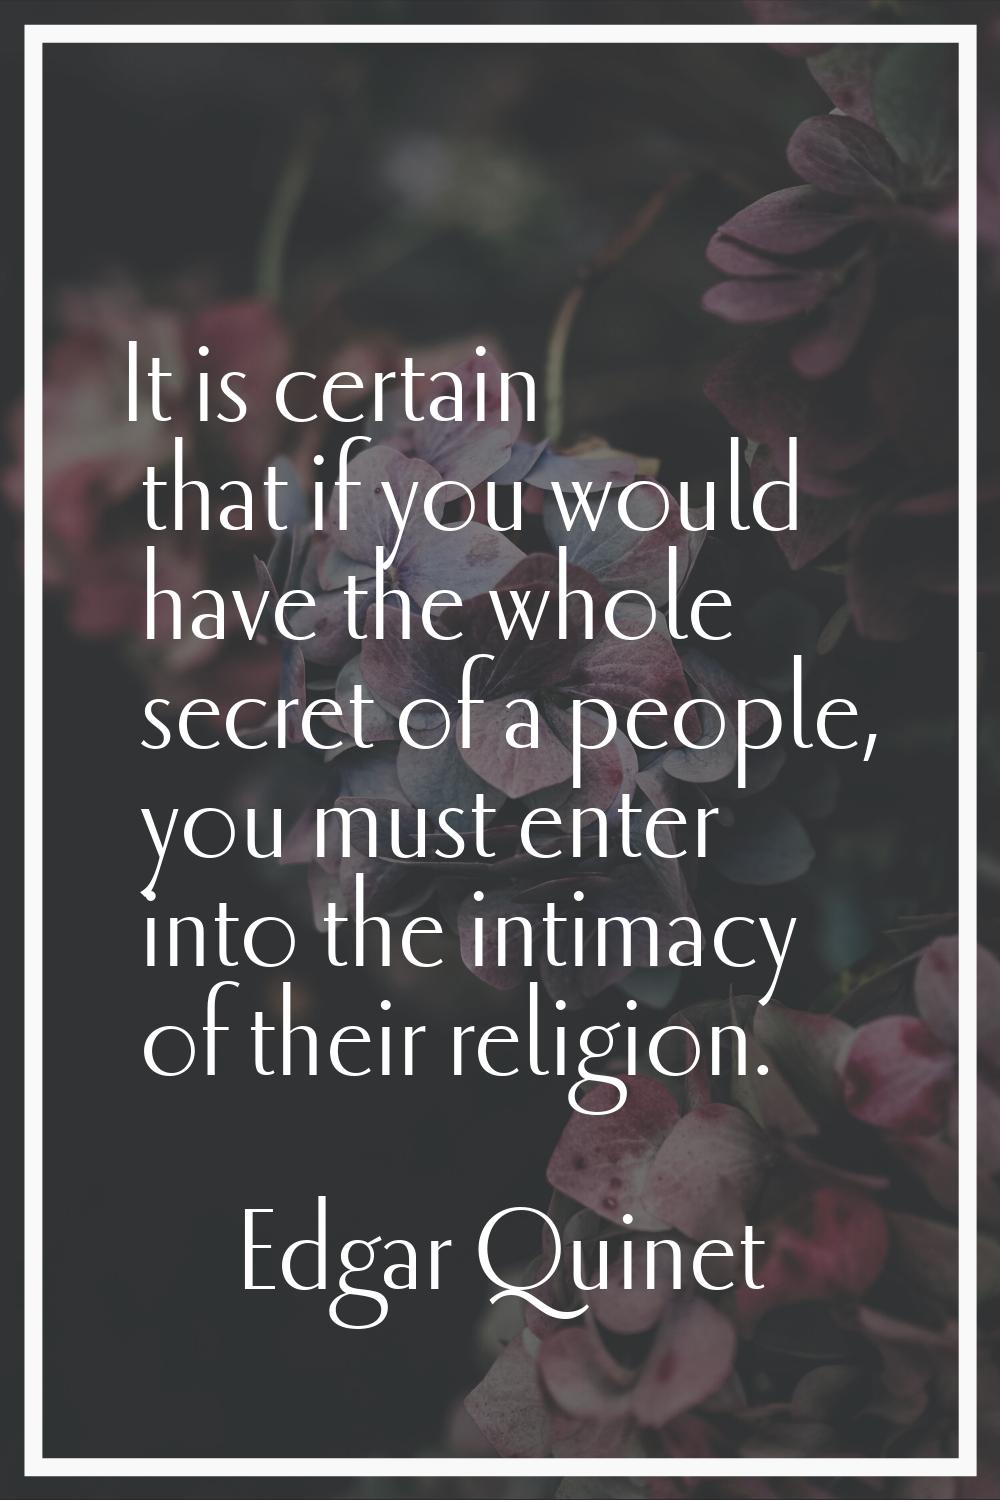 It is certain that if you would have the whole secret of a people, you must enter into the intimacy